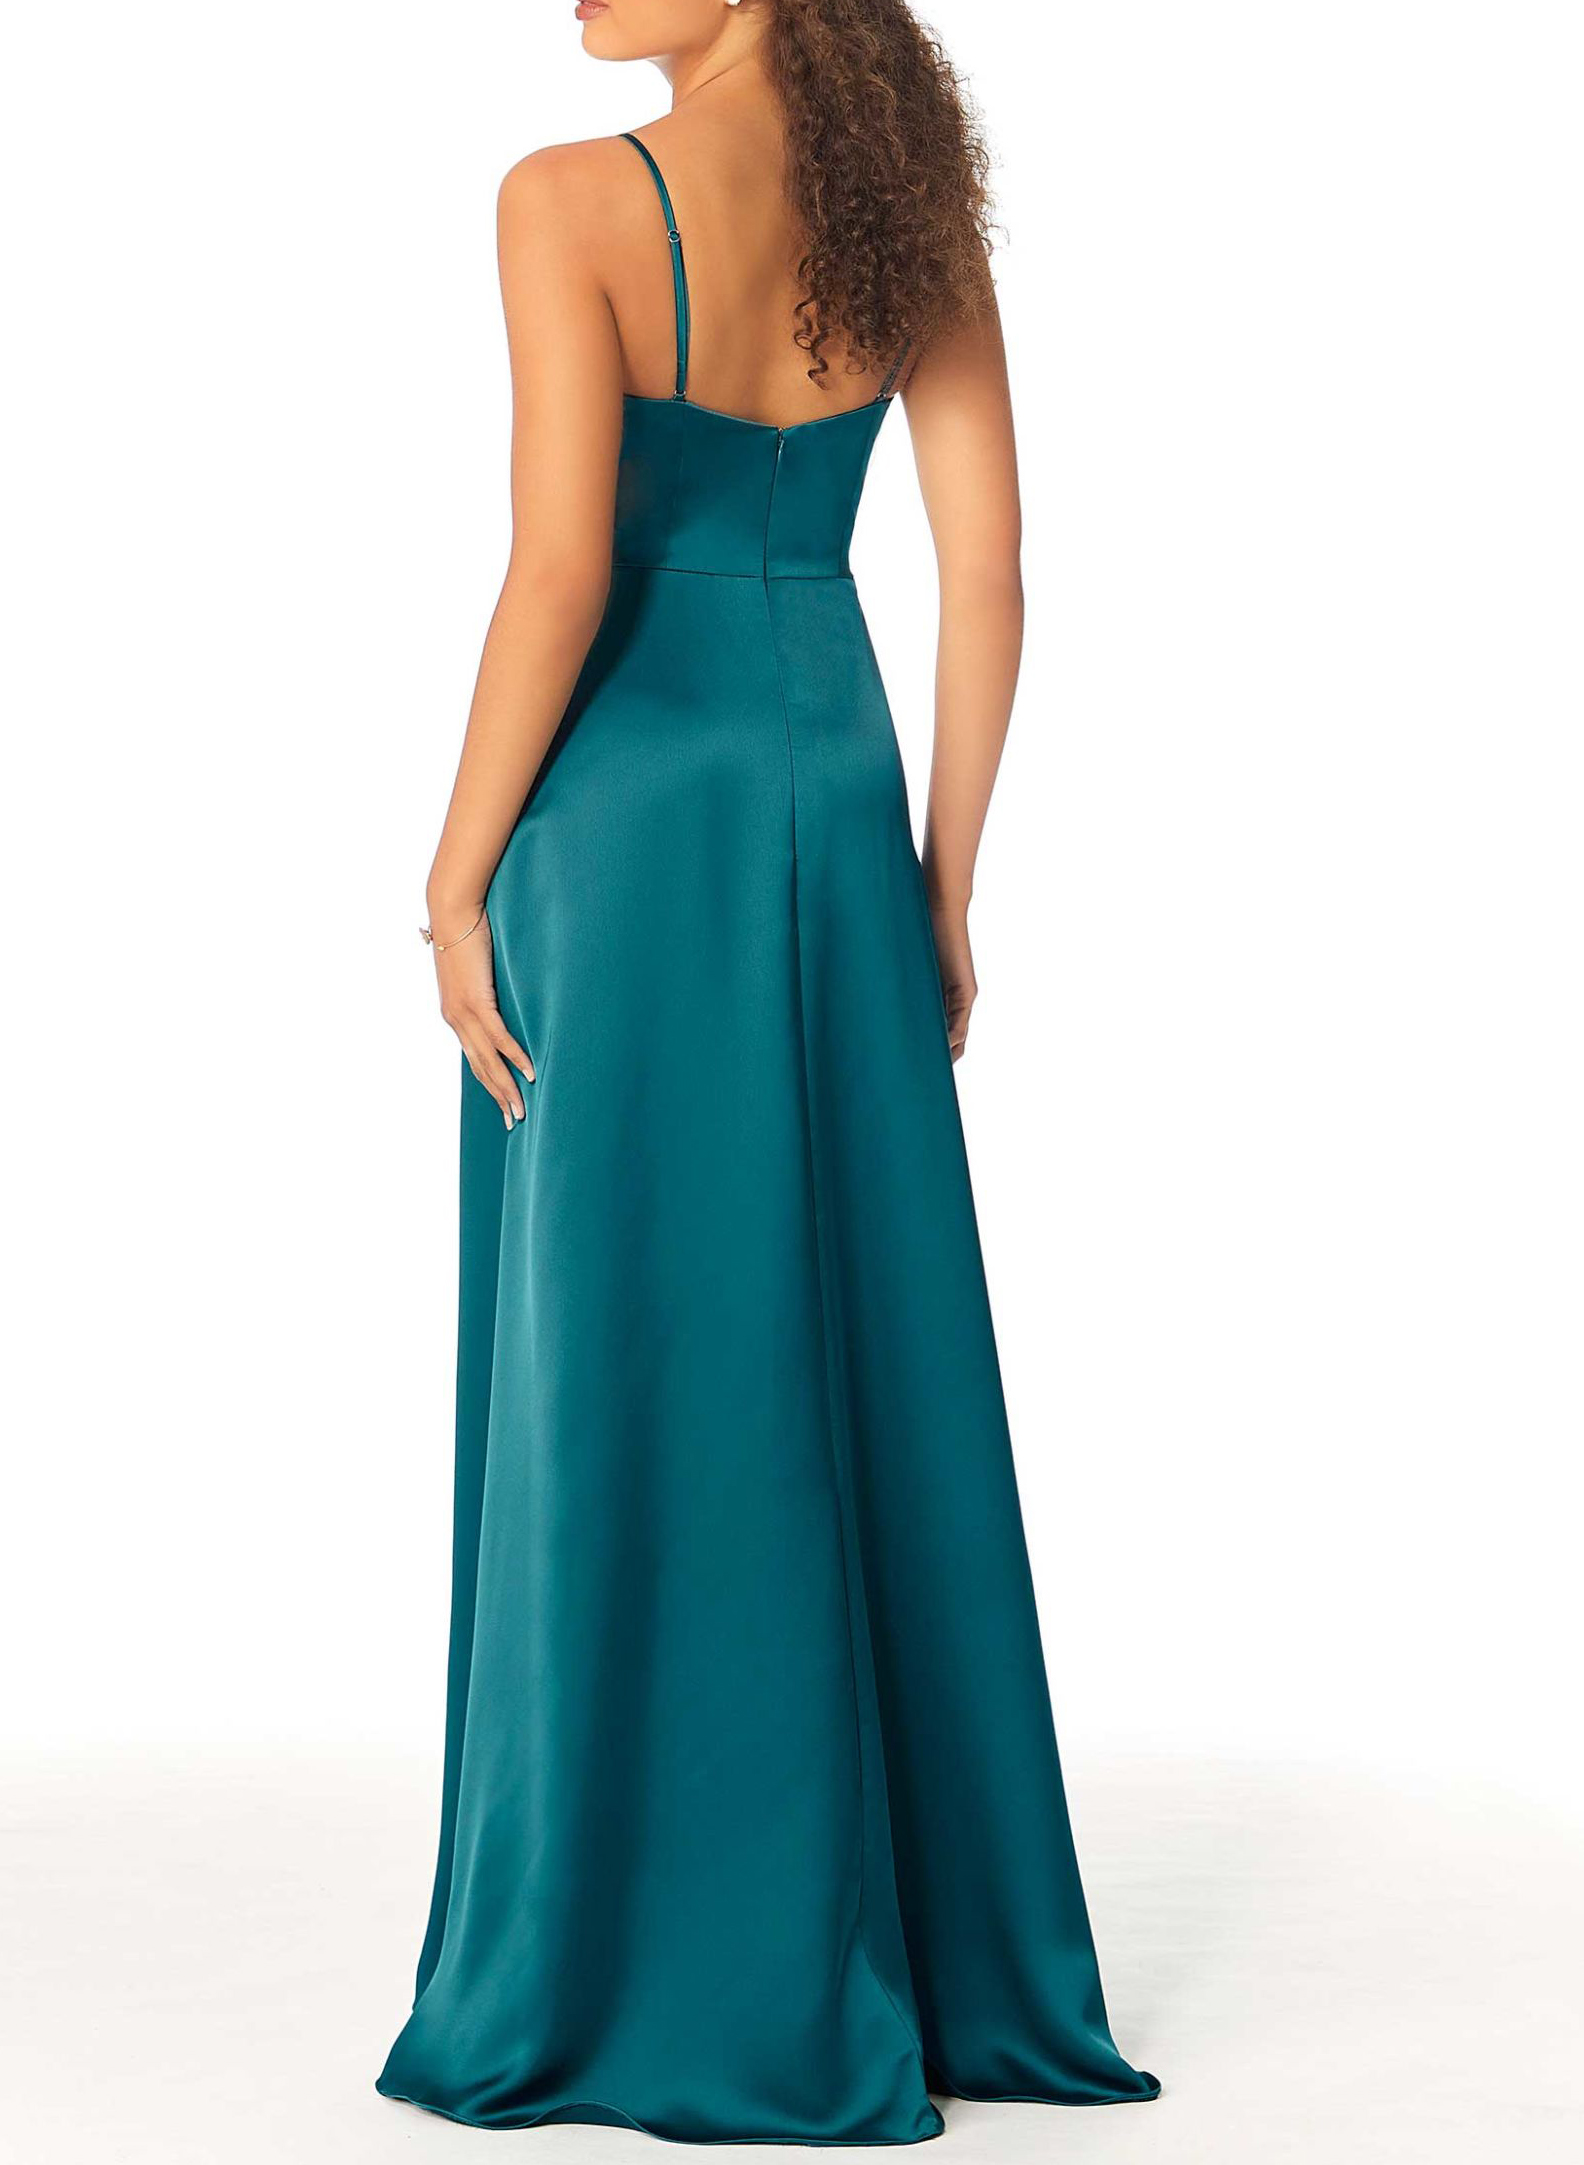 Cowl Neck Satin Bridesmaid Dresses With A-Line